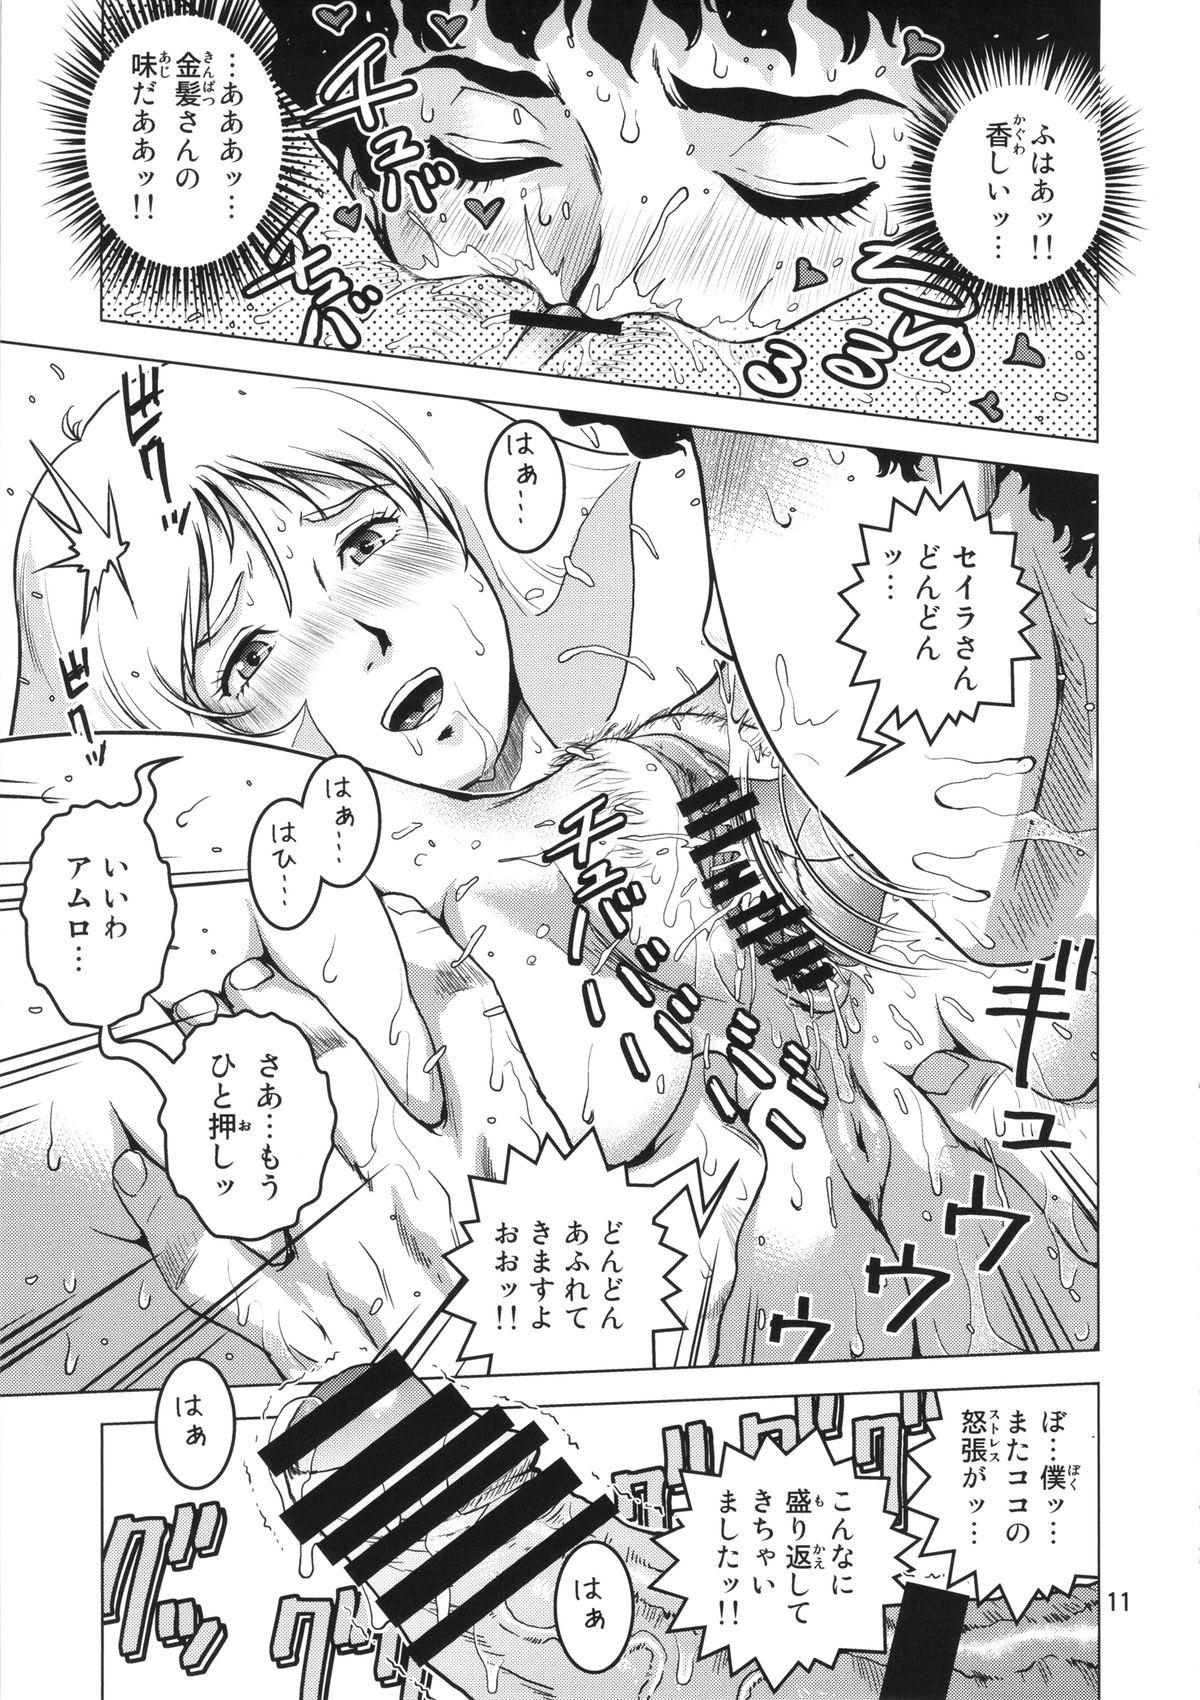 Show Osase no Sayla-san - Mobile suit gundam Roleplay - Page 10